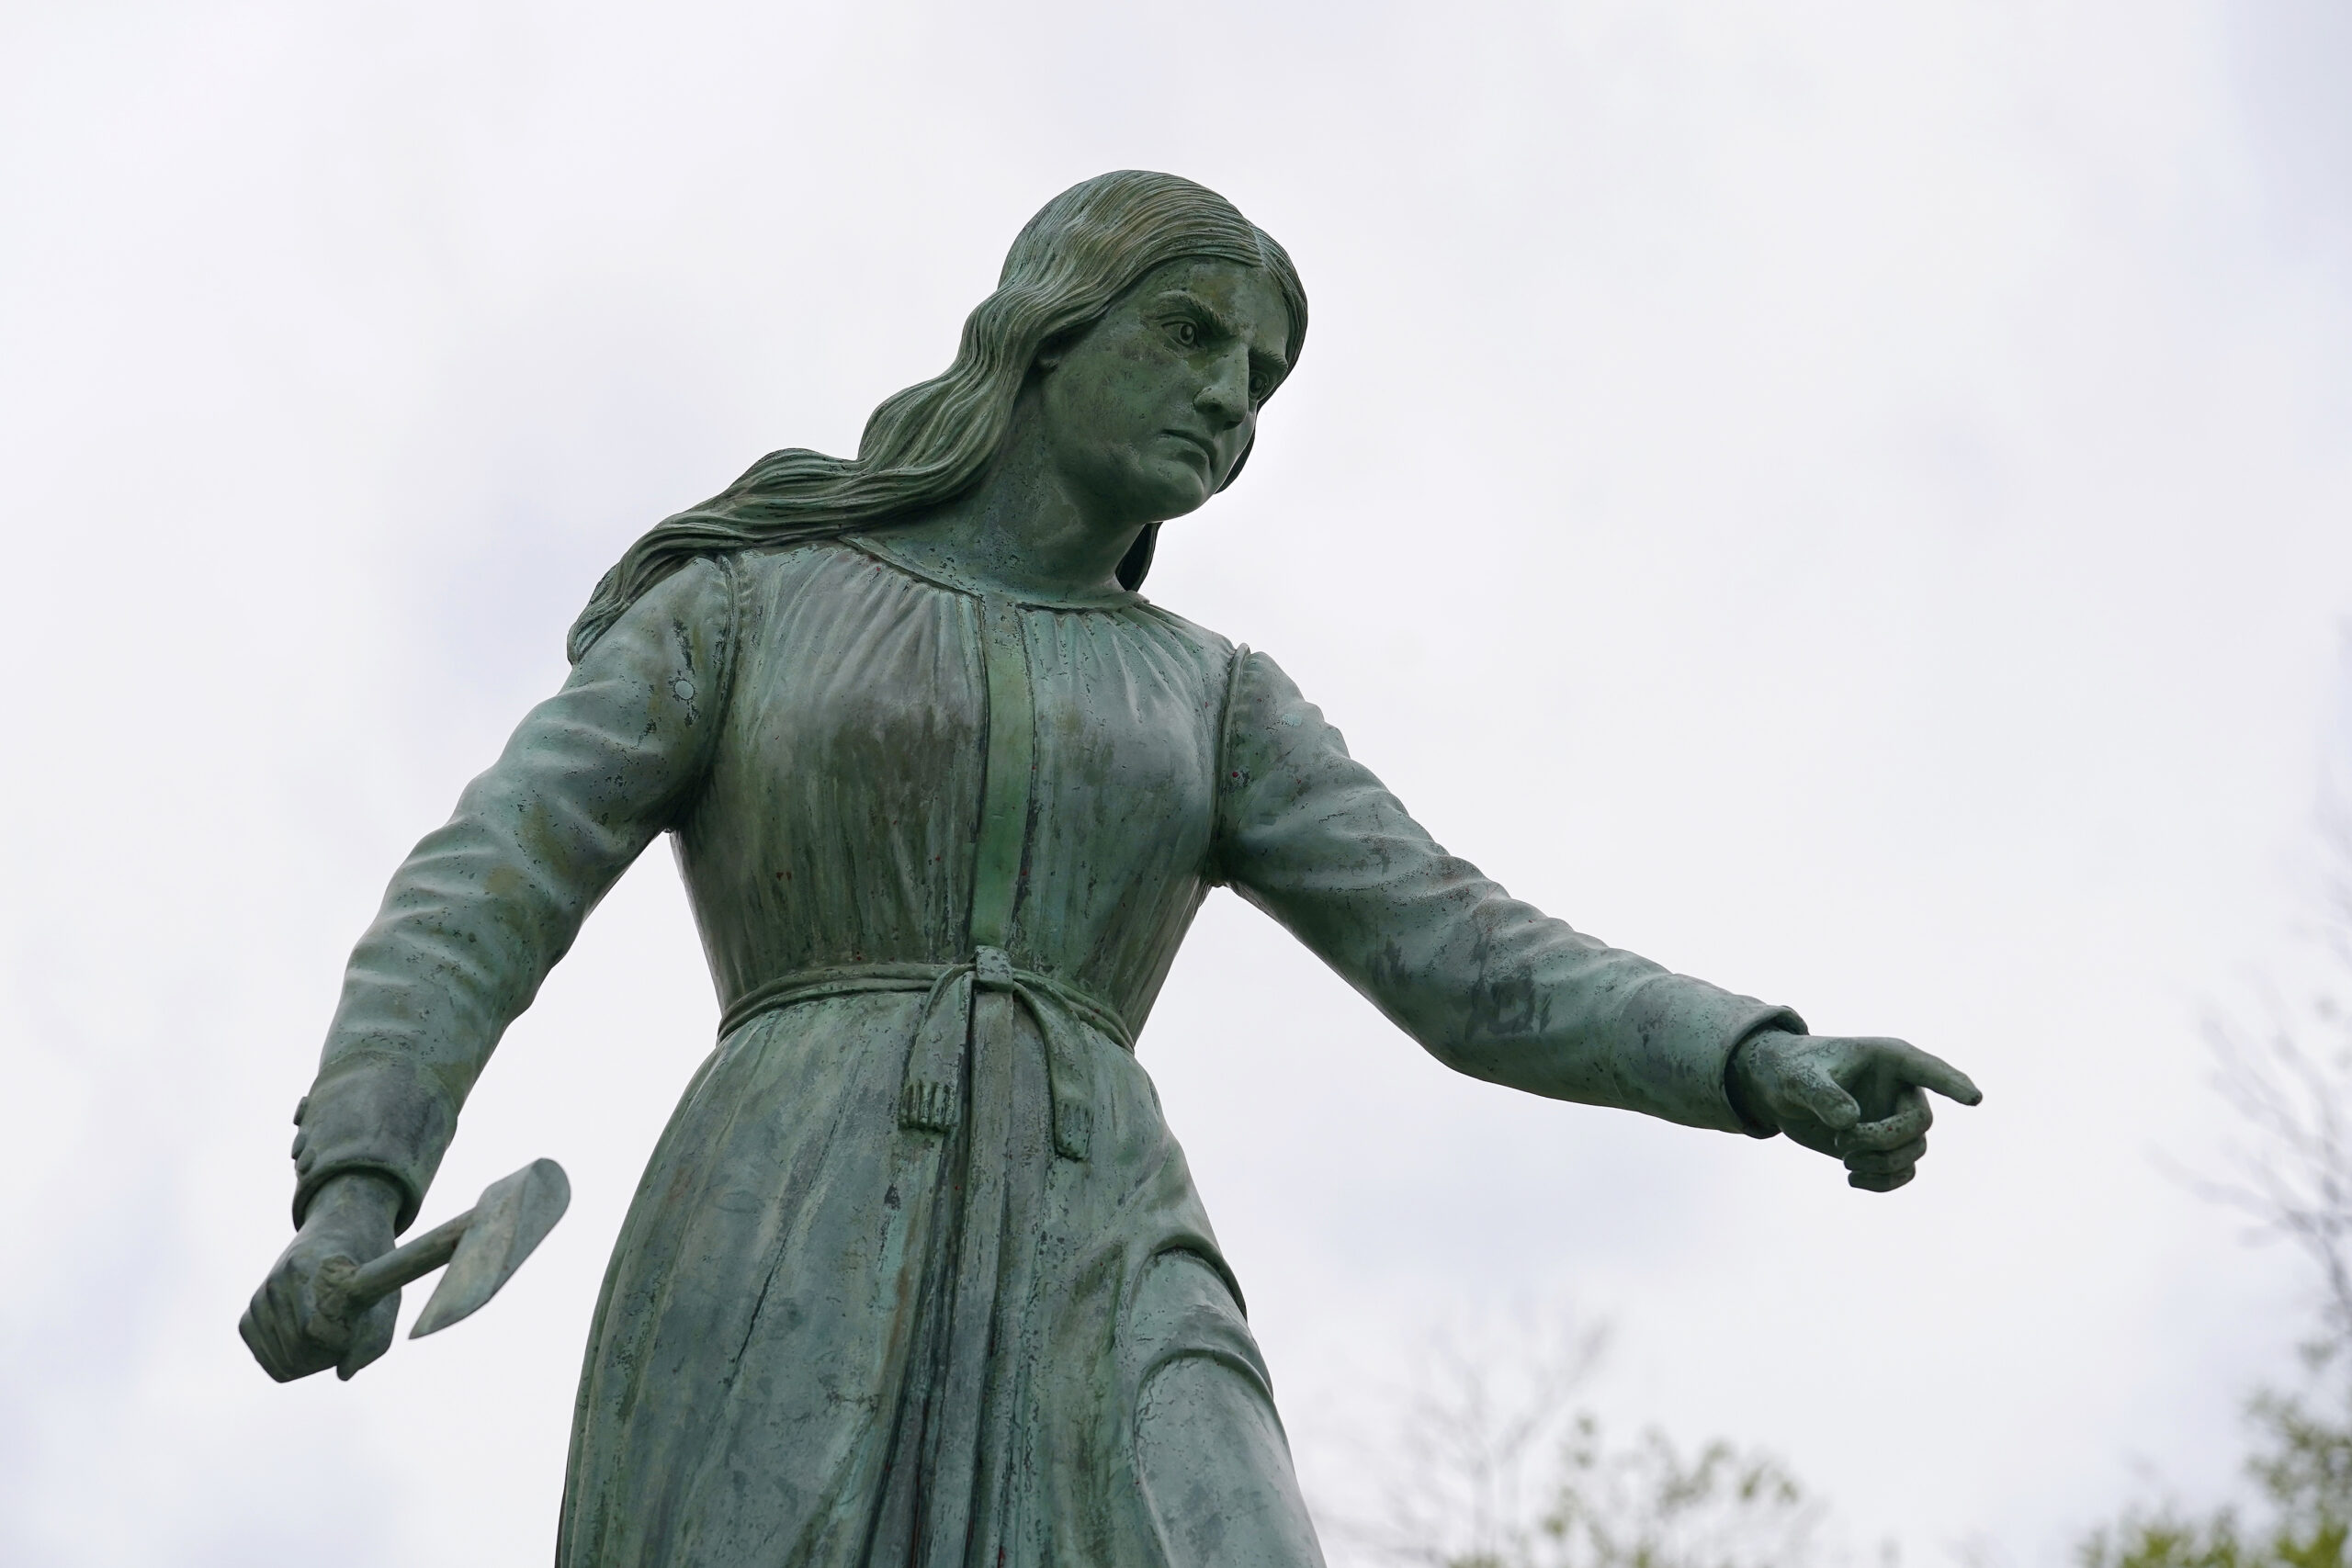 A statue of Hannah Duston, dated 1879, stands in the Grand Army of the Republic Park, Wednesday, April 28, 2021, in Haverhill, Mass., meant to honor the English colonist who, legend has it, slaughtered her Native American captors after the gruesome killing of her baby. But the statue in Haverhill, and another of Duston in New Hampshire, are being reconsidered amid the nationwide reckoning on racism and controversial public monuments. (AP Photo/Steven Senne)